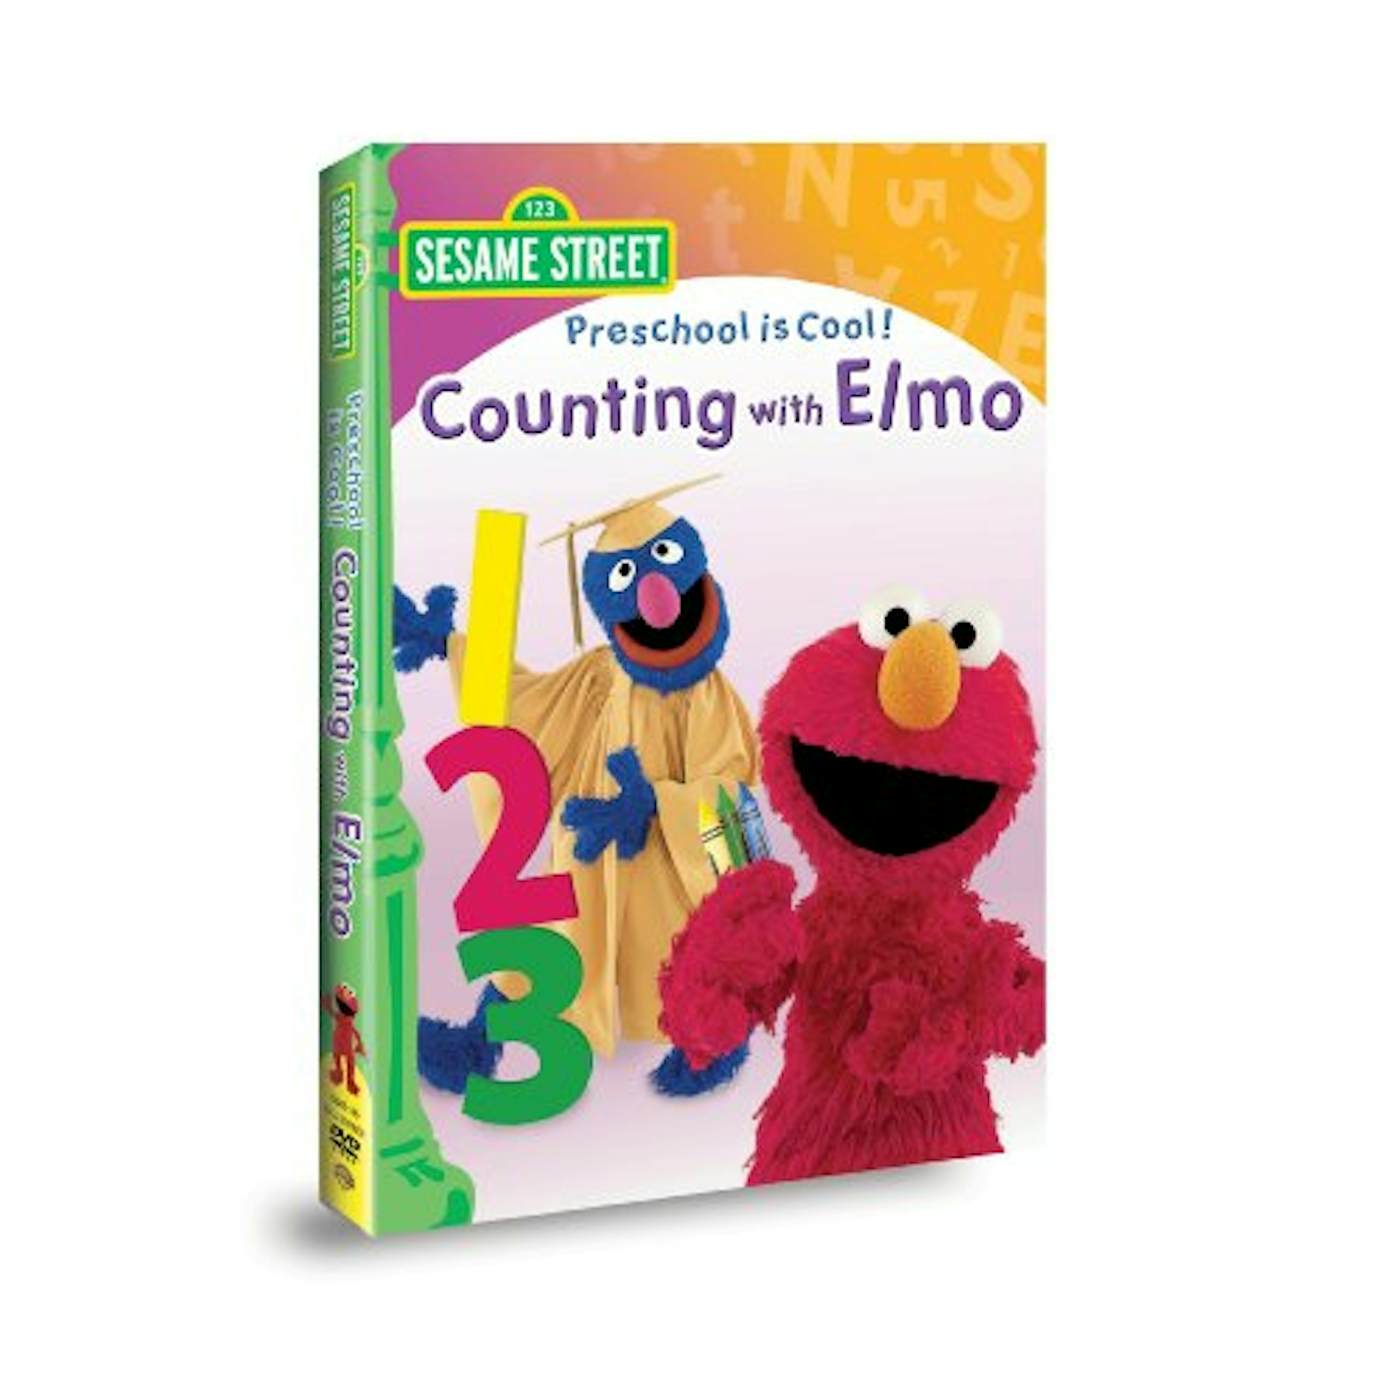 Sesame Street PRESCHOOL IS COOL: COUNTING WITH ELMO DVD